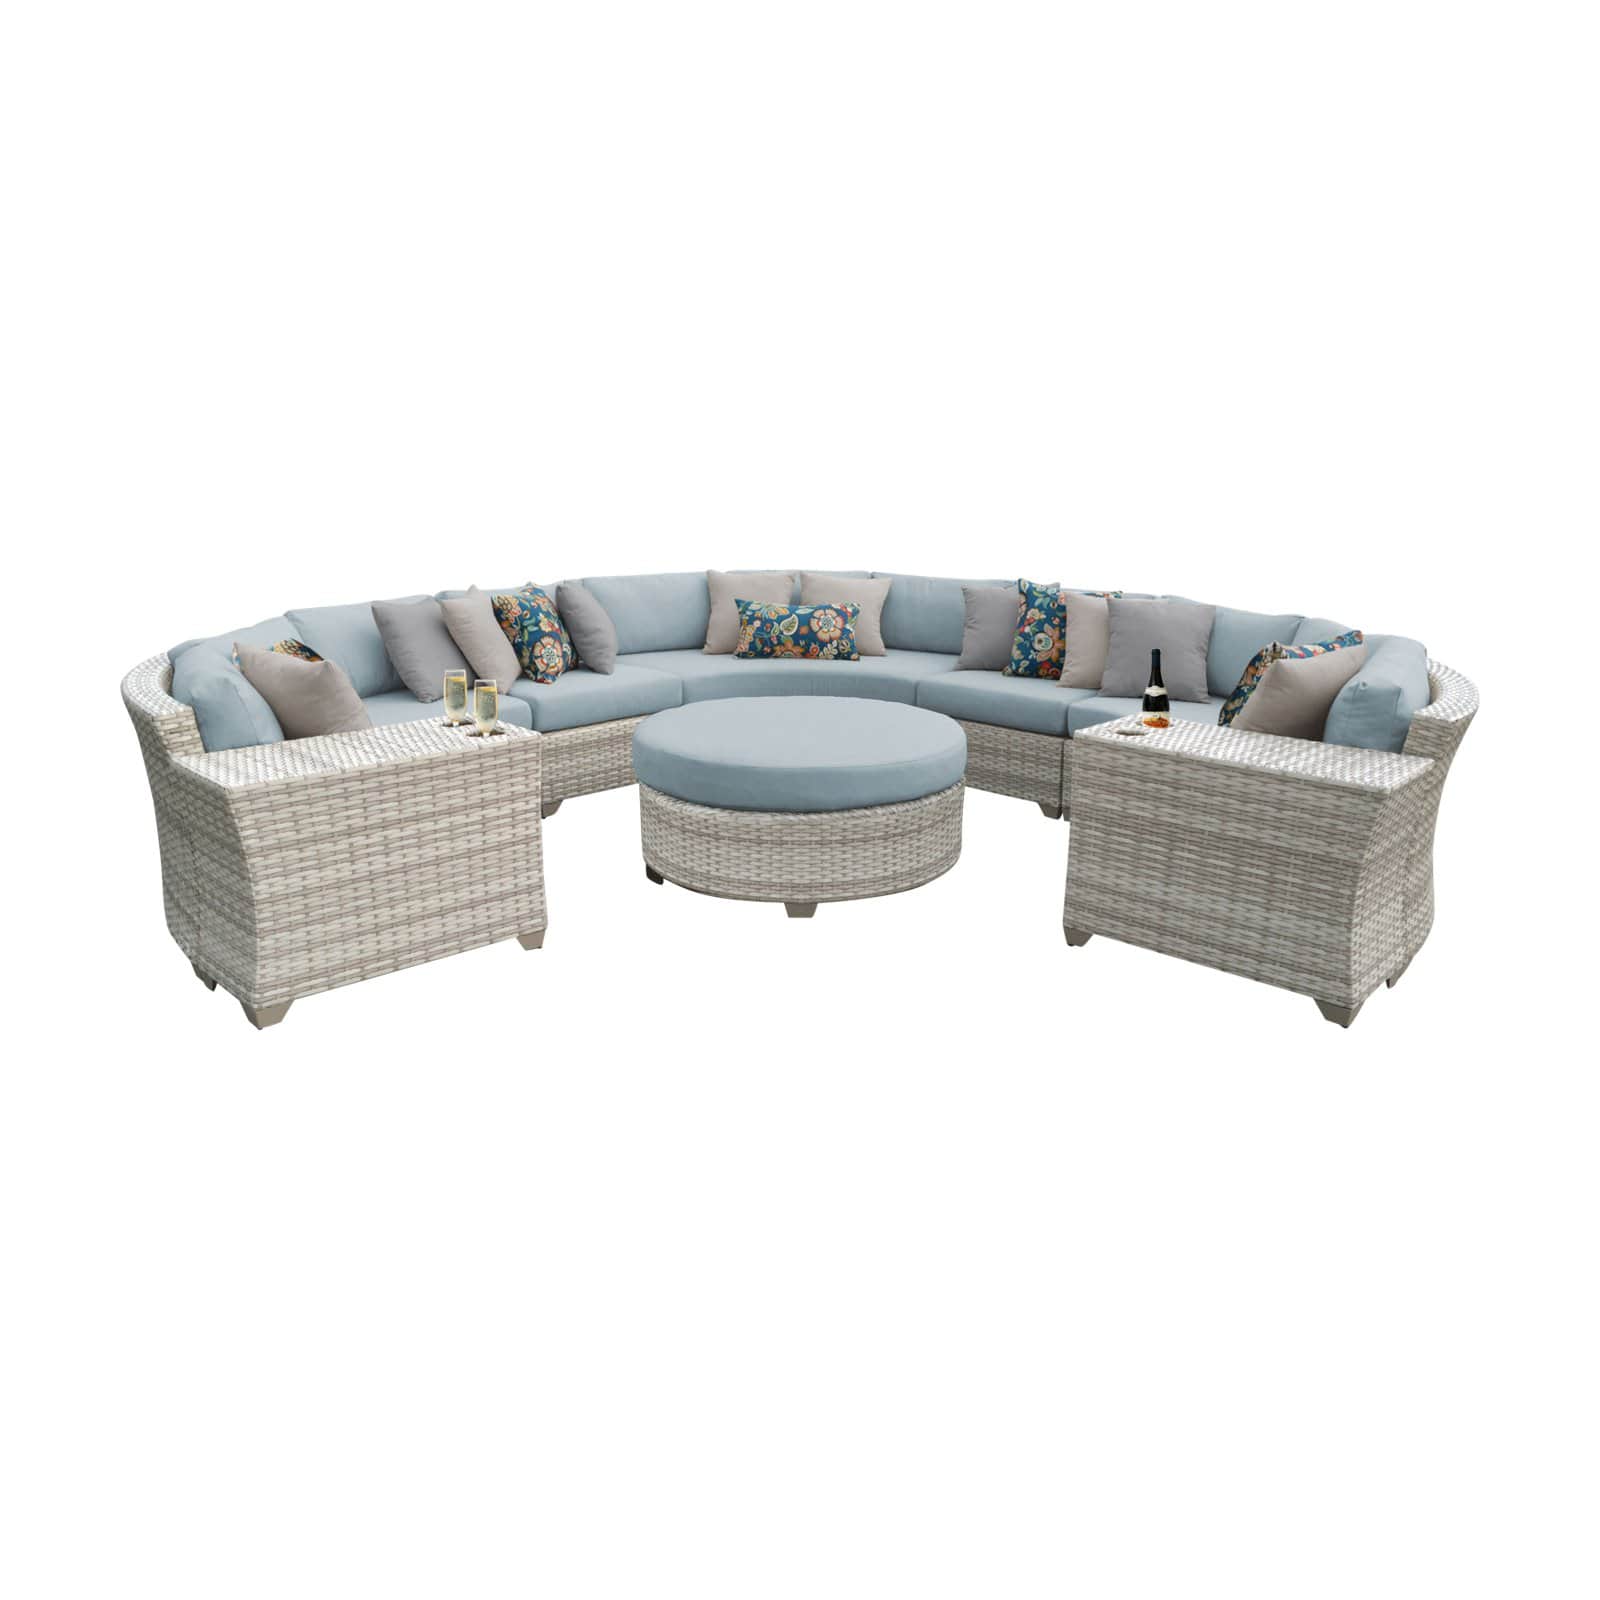 TK Classics Fairmont All-Weather Wicker 8 Piece Round Sectional Patio Conversation Set - image 2 of 2